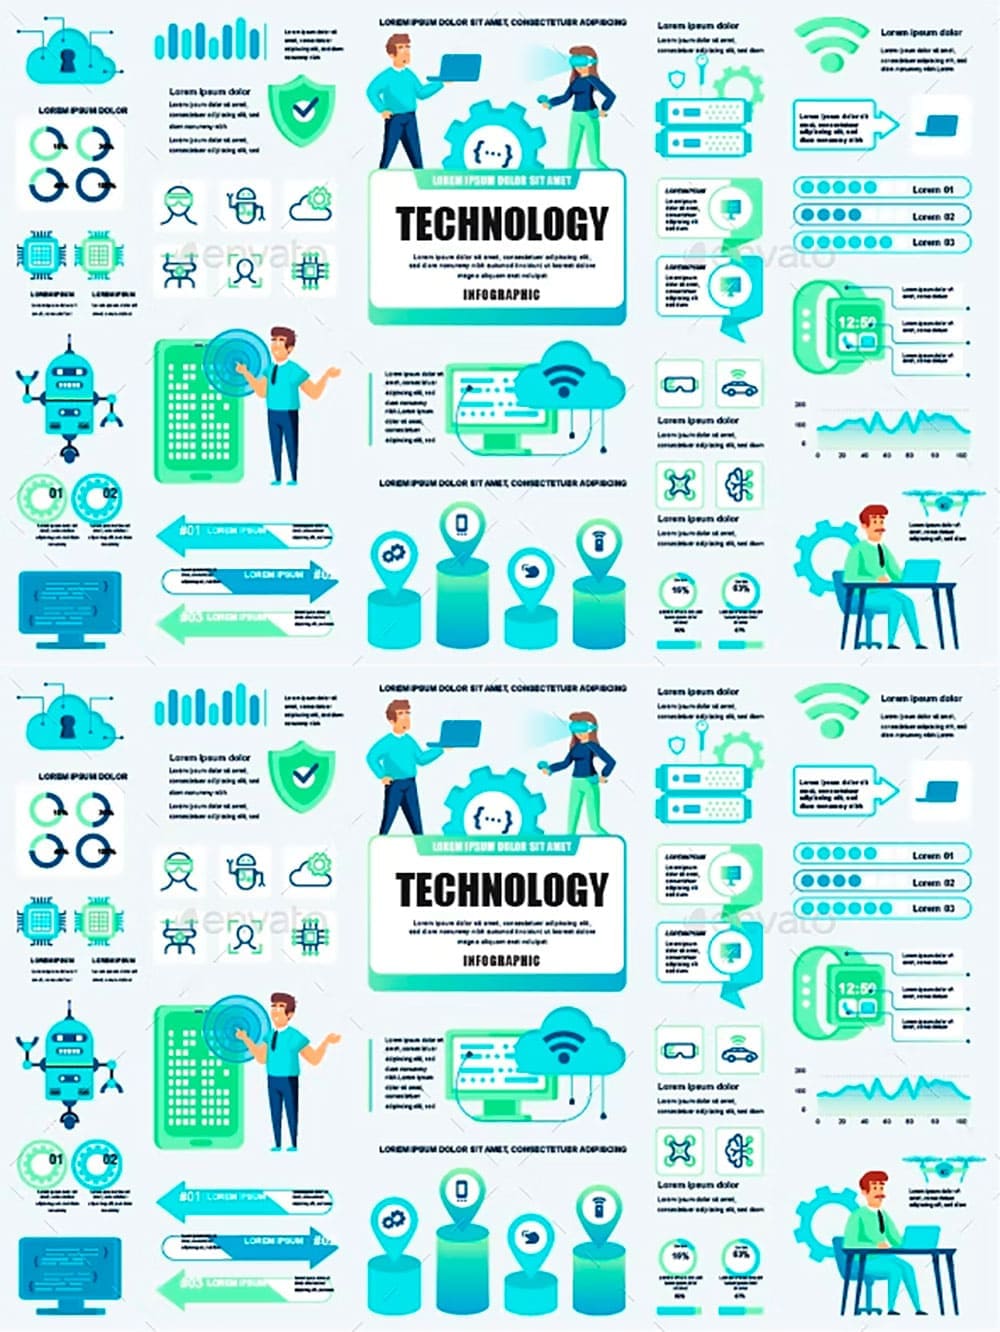 Technology infographics, picture for pinterest.